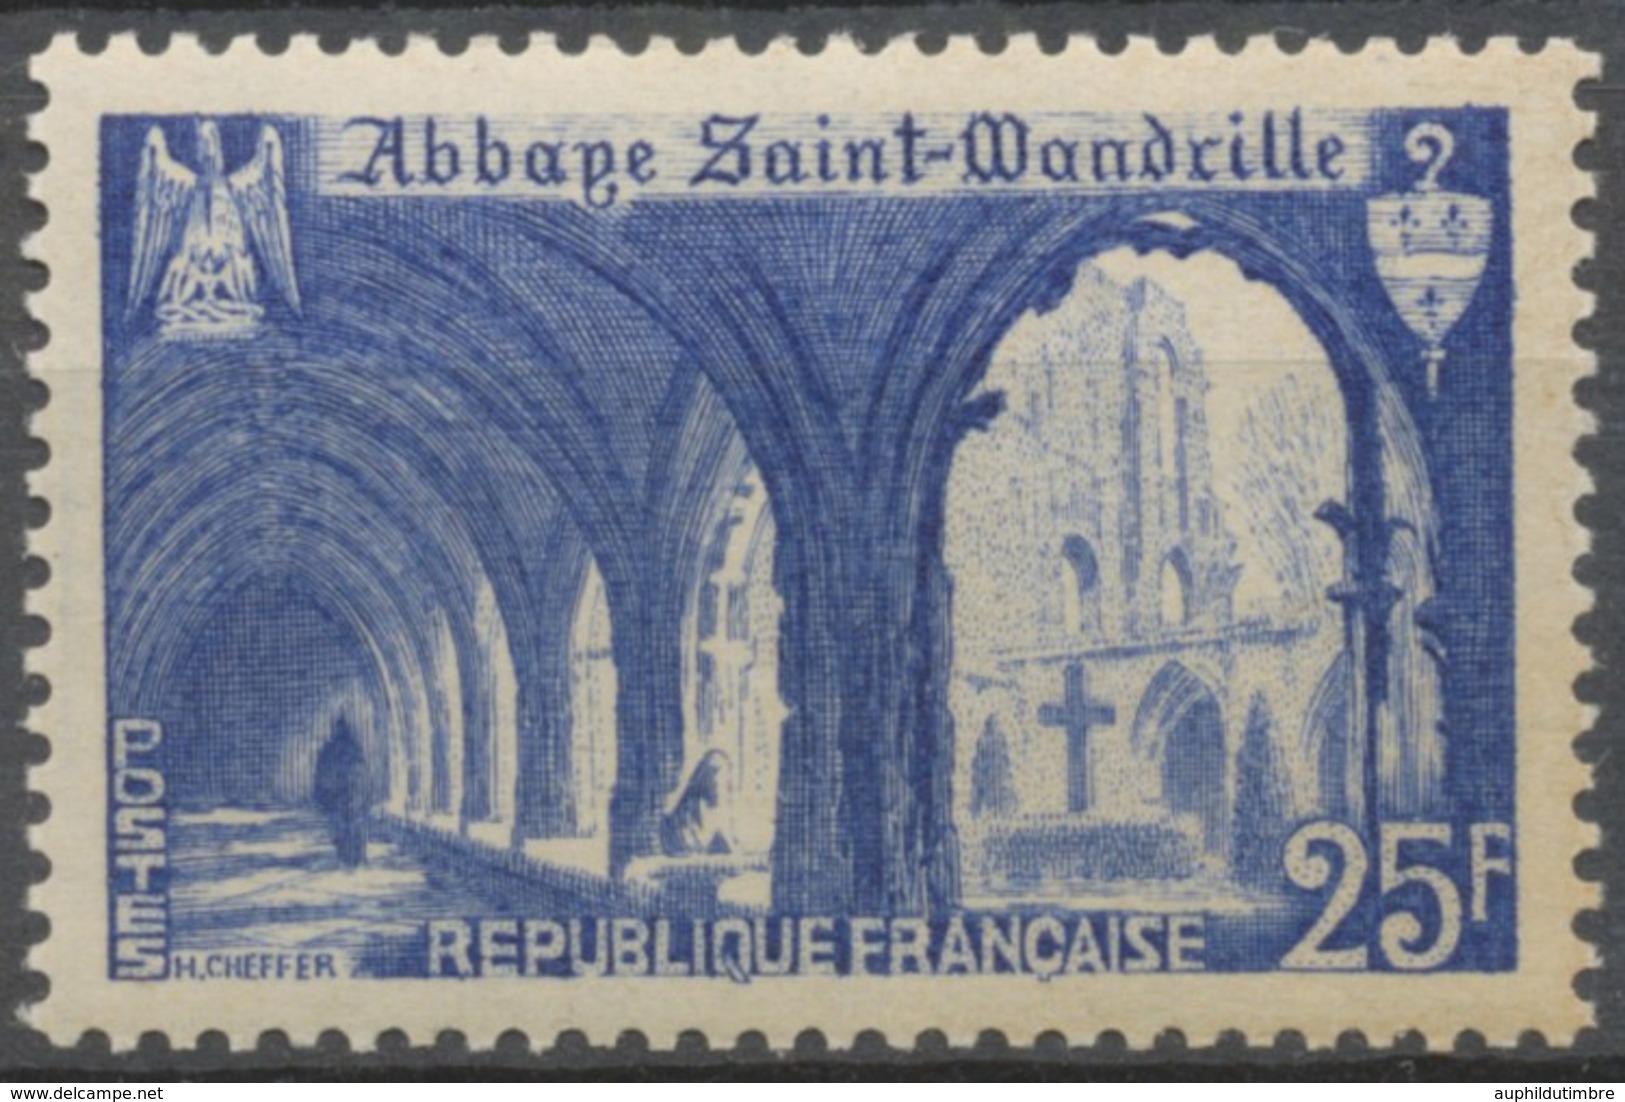 Monuments Et Sites. Abbaye De Saint-Wandrille. 25f. Outremer Neuf Luxe ** Y842 - Ungebraucht